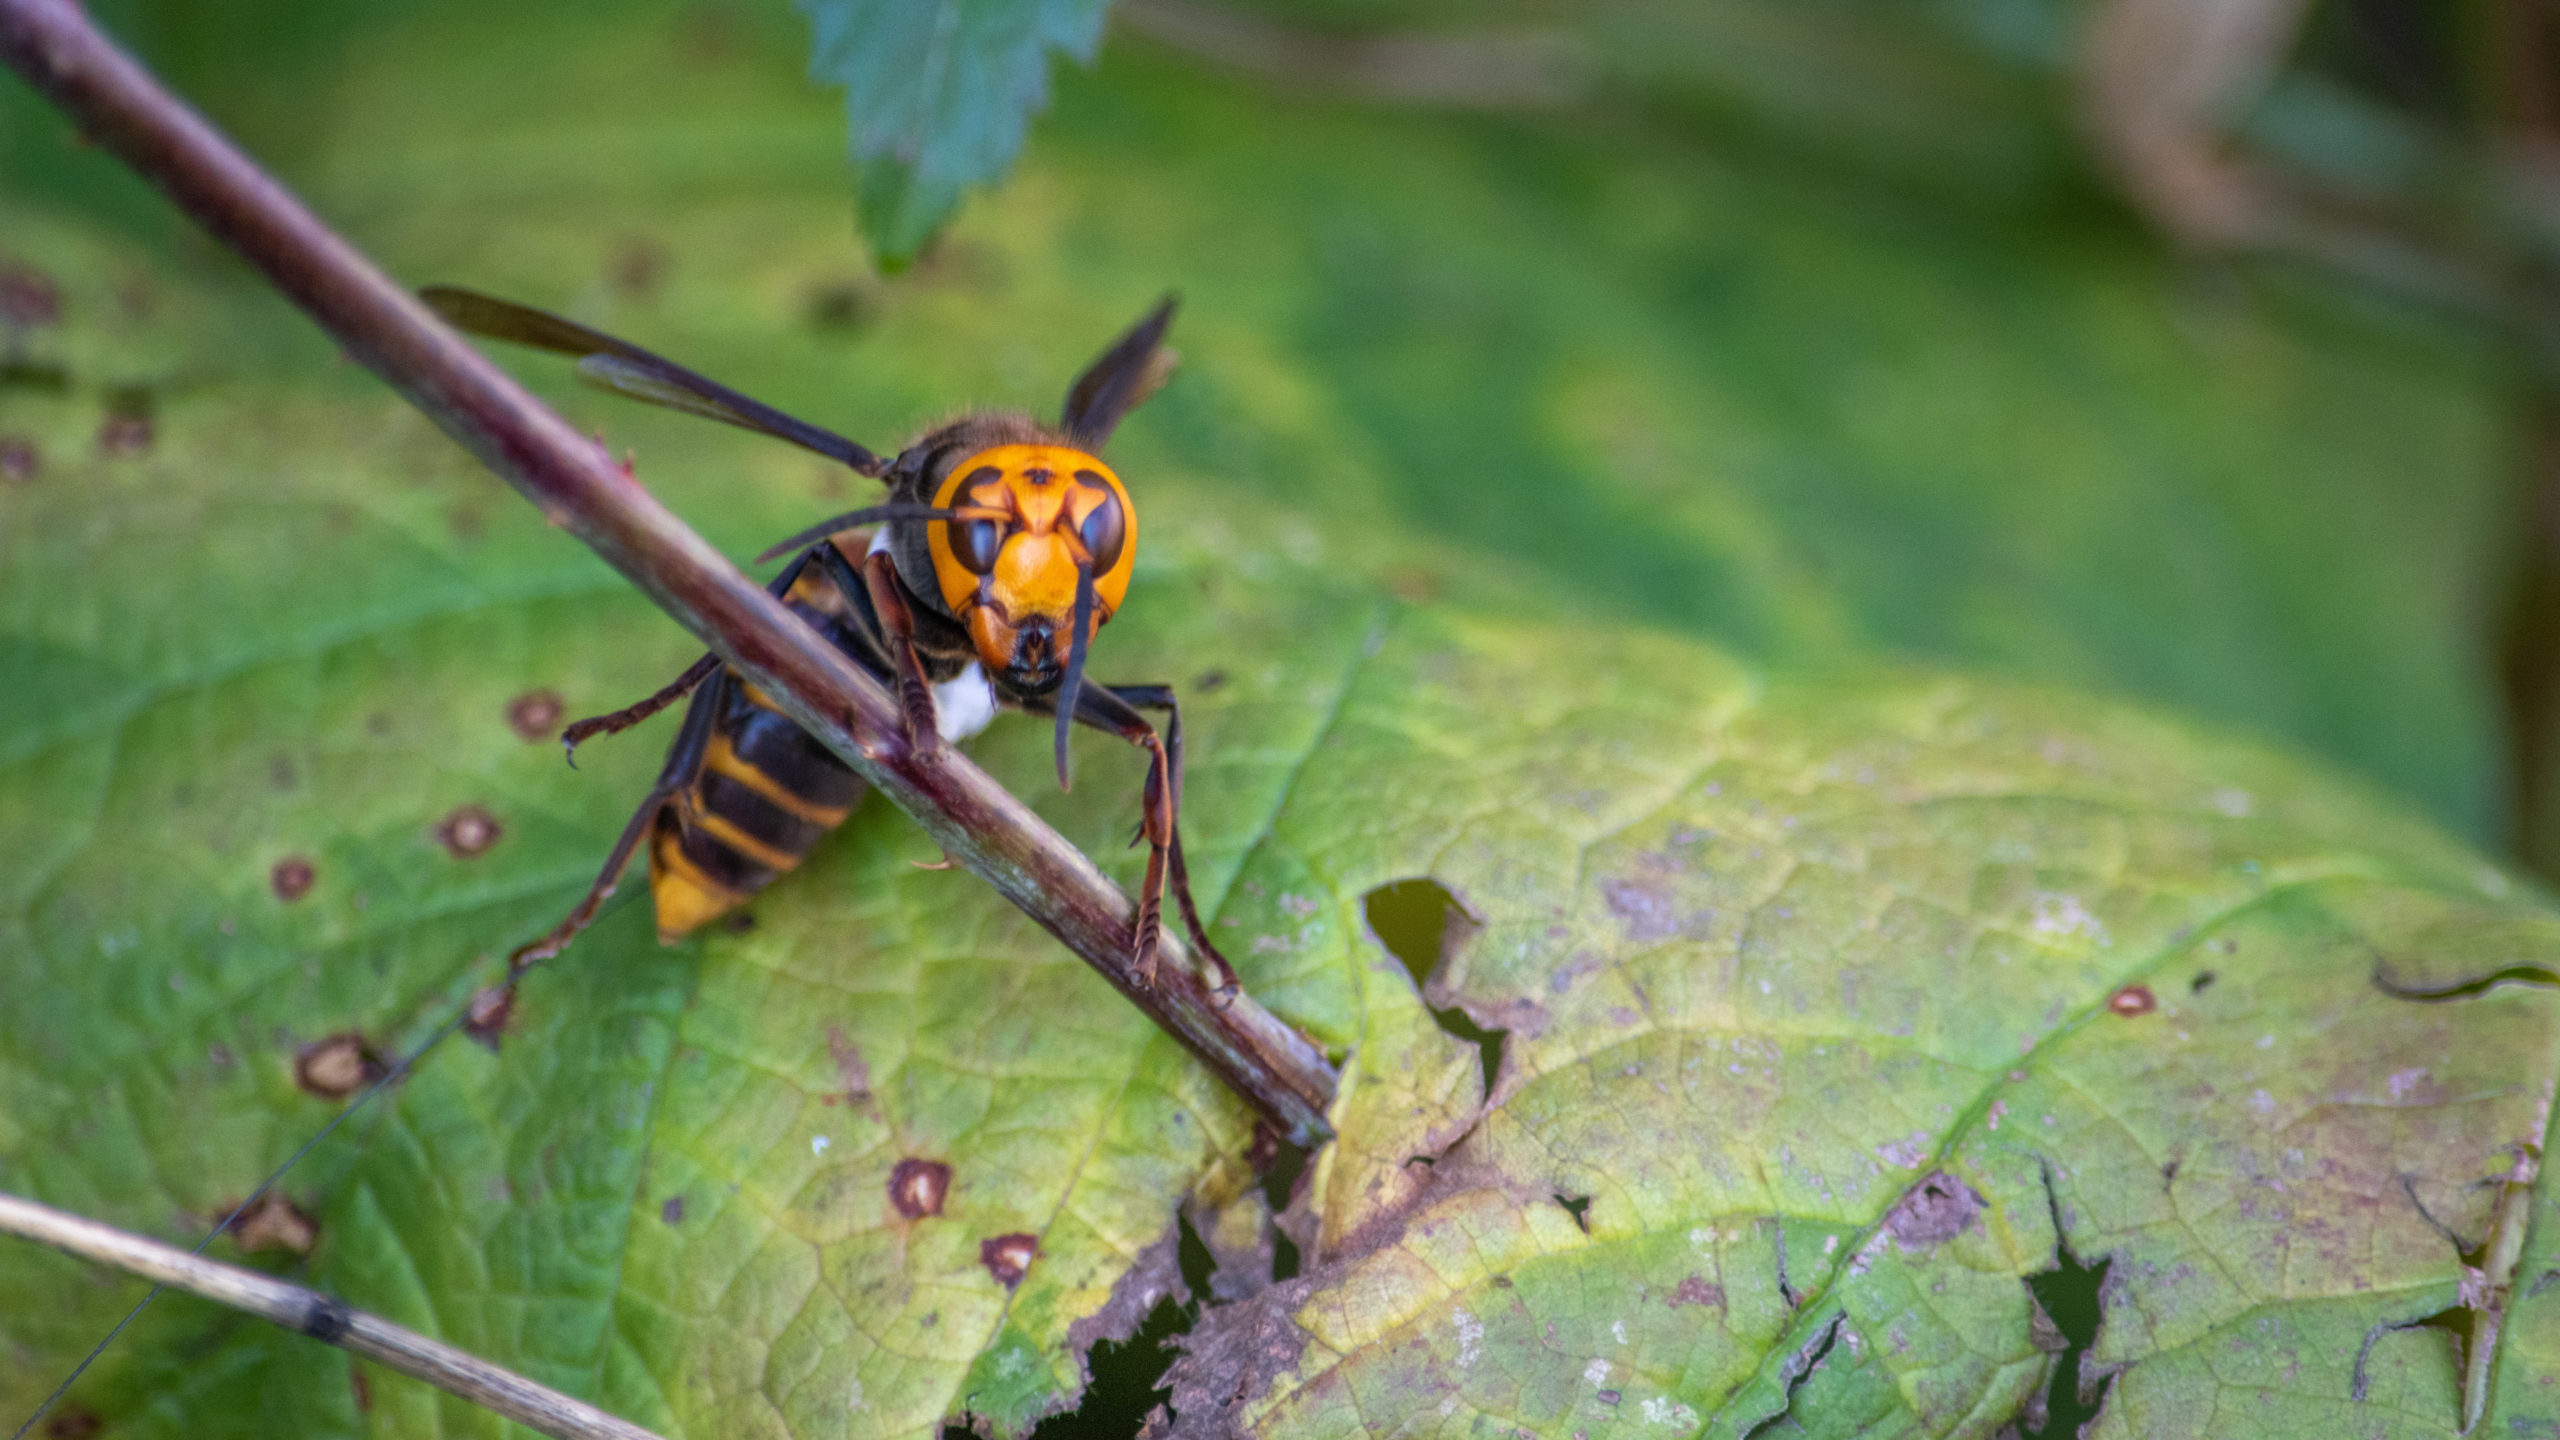 A picture of an actual Asian giant hornet, aka murder hornet, aka Vespa mandarinia, taken by the entomologists in Washington who discovered the bugs' first known nest in the country. (Photo: Washington State Dept. of Agriculture)